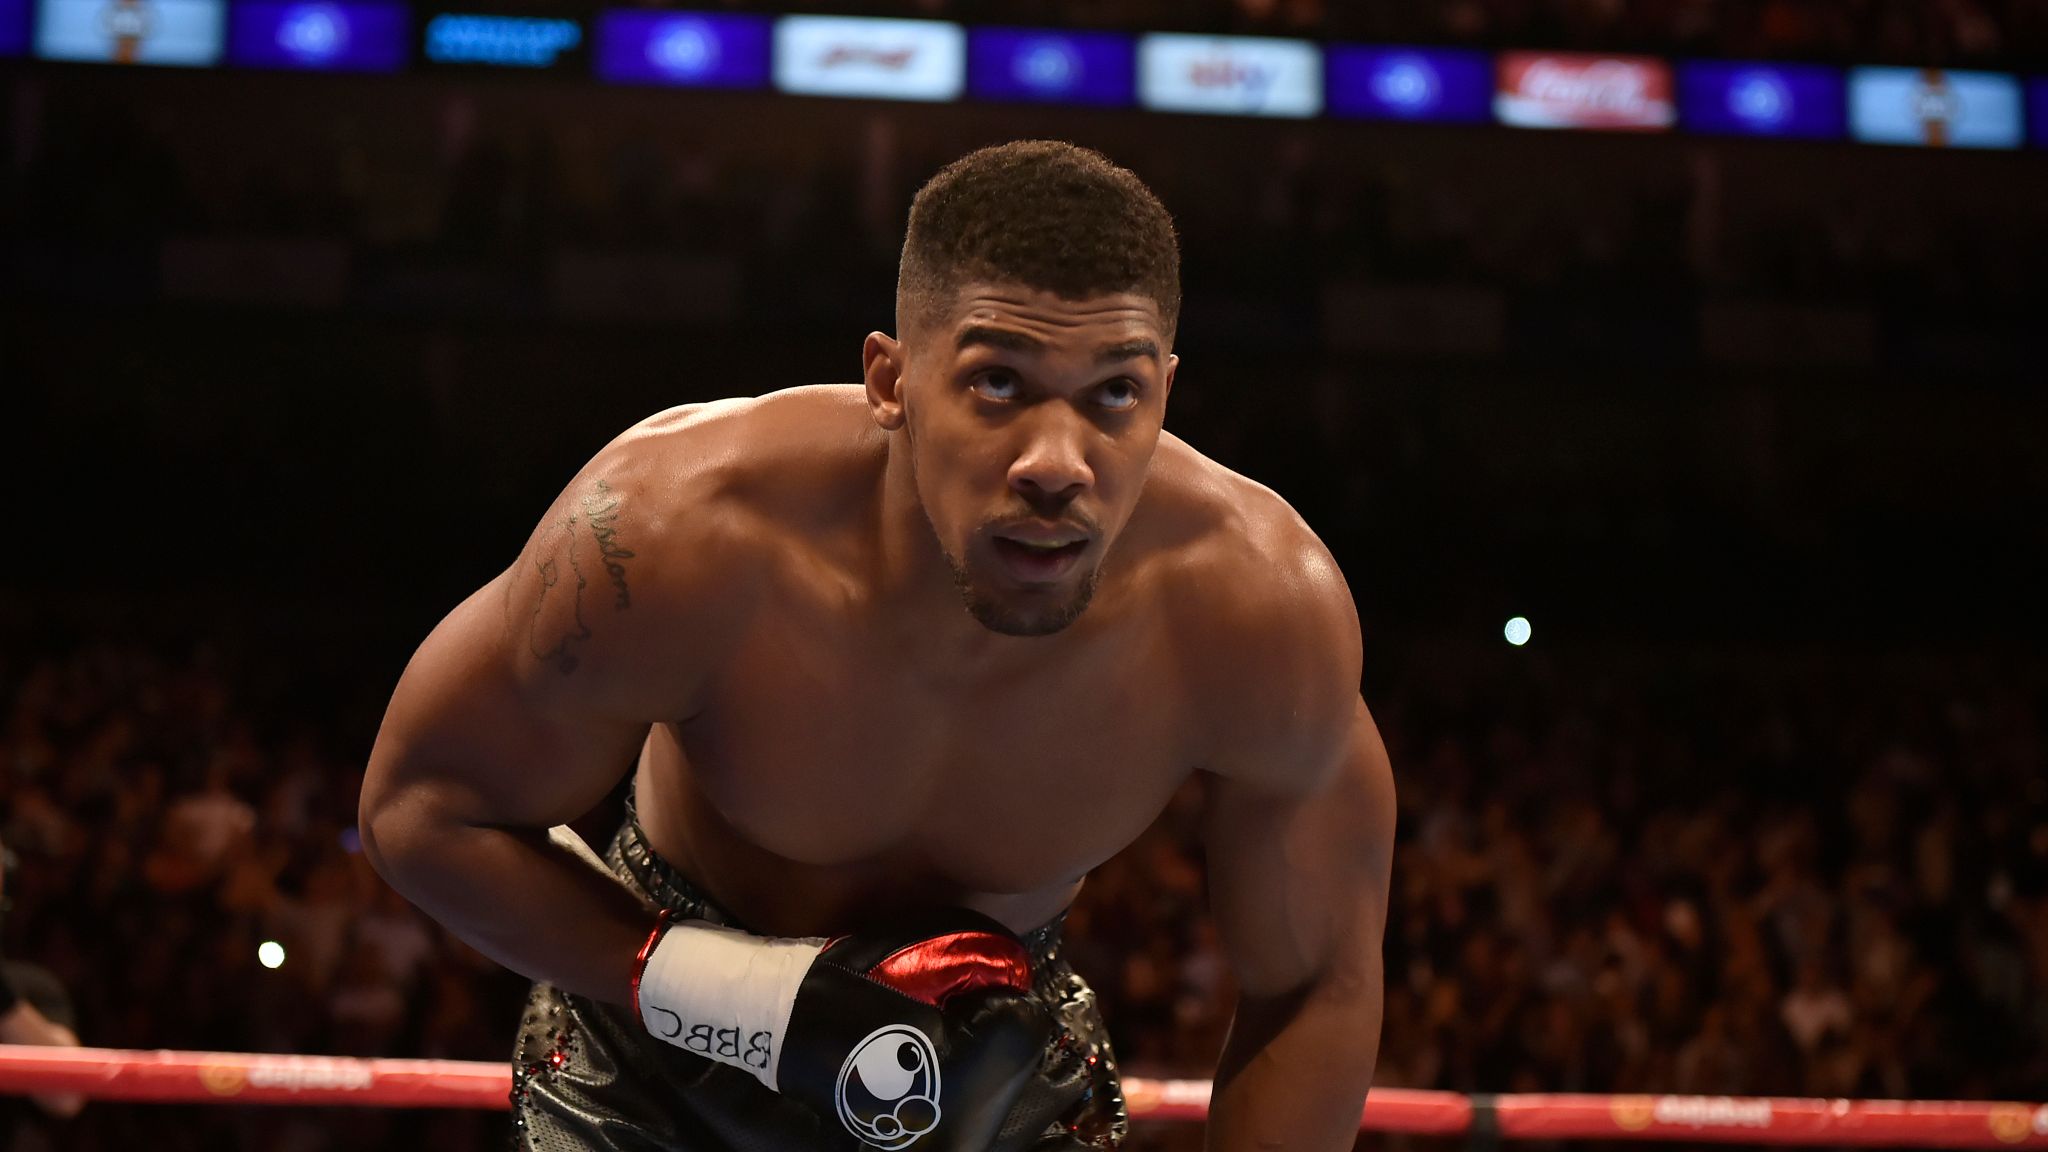 Anthony Joshua is bringing new fans to boxing says Sky Sports pundit ...